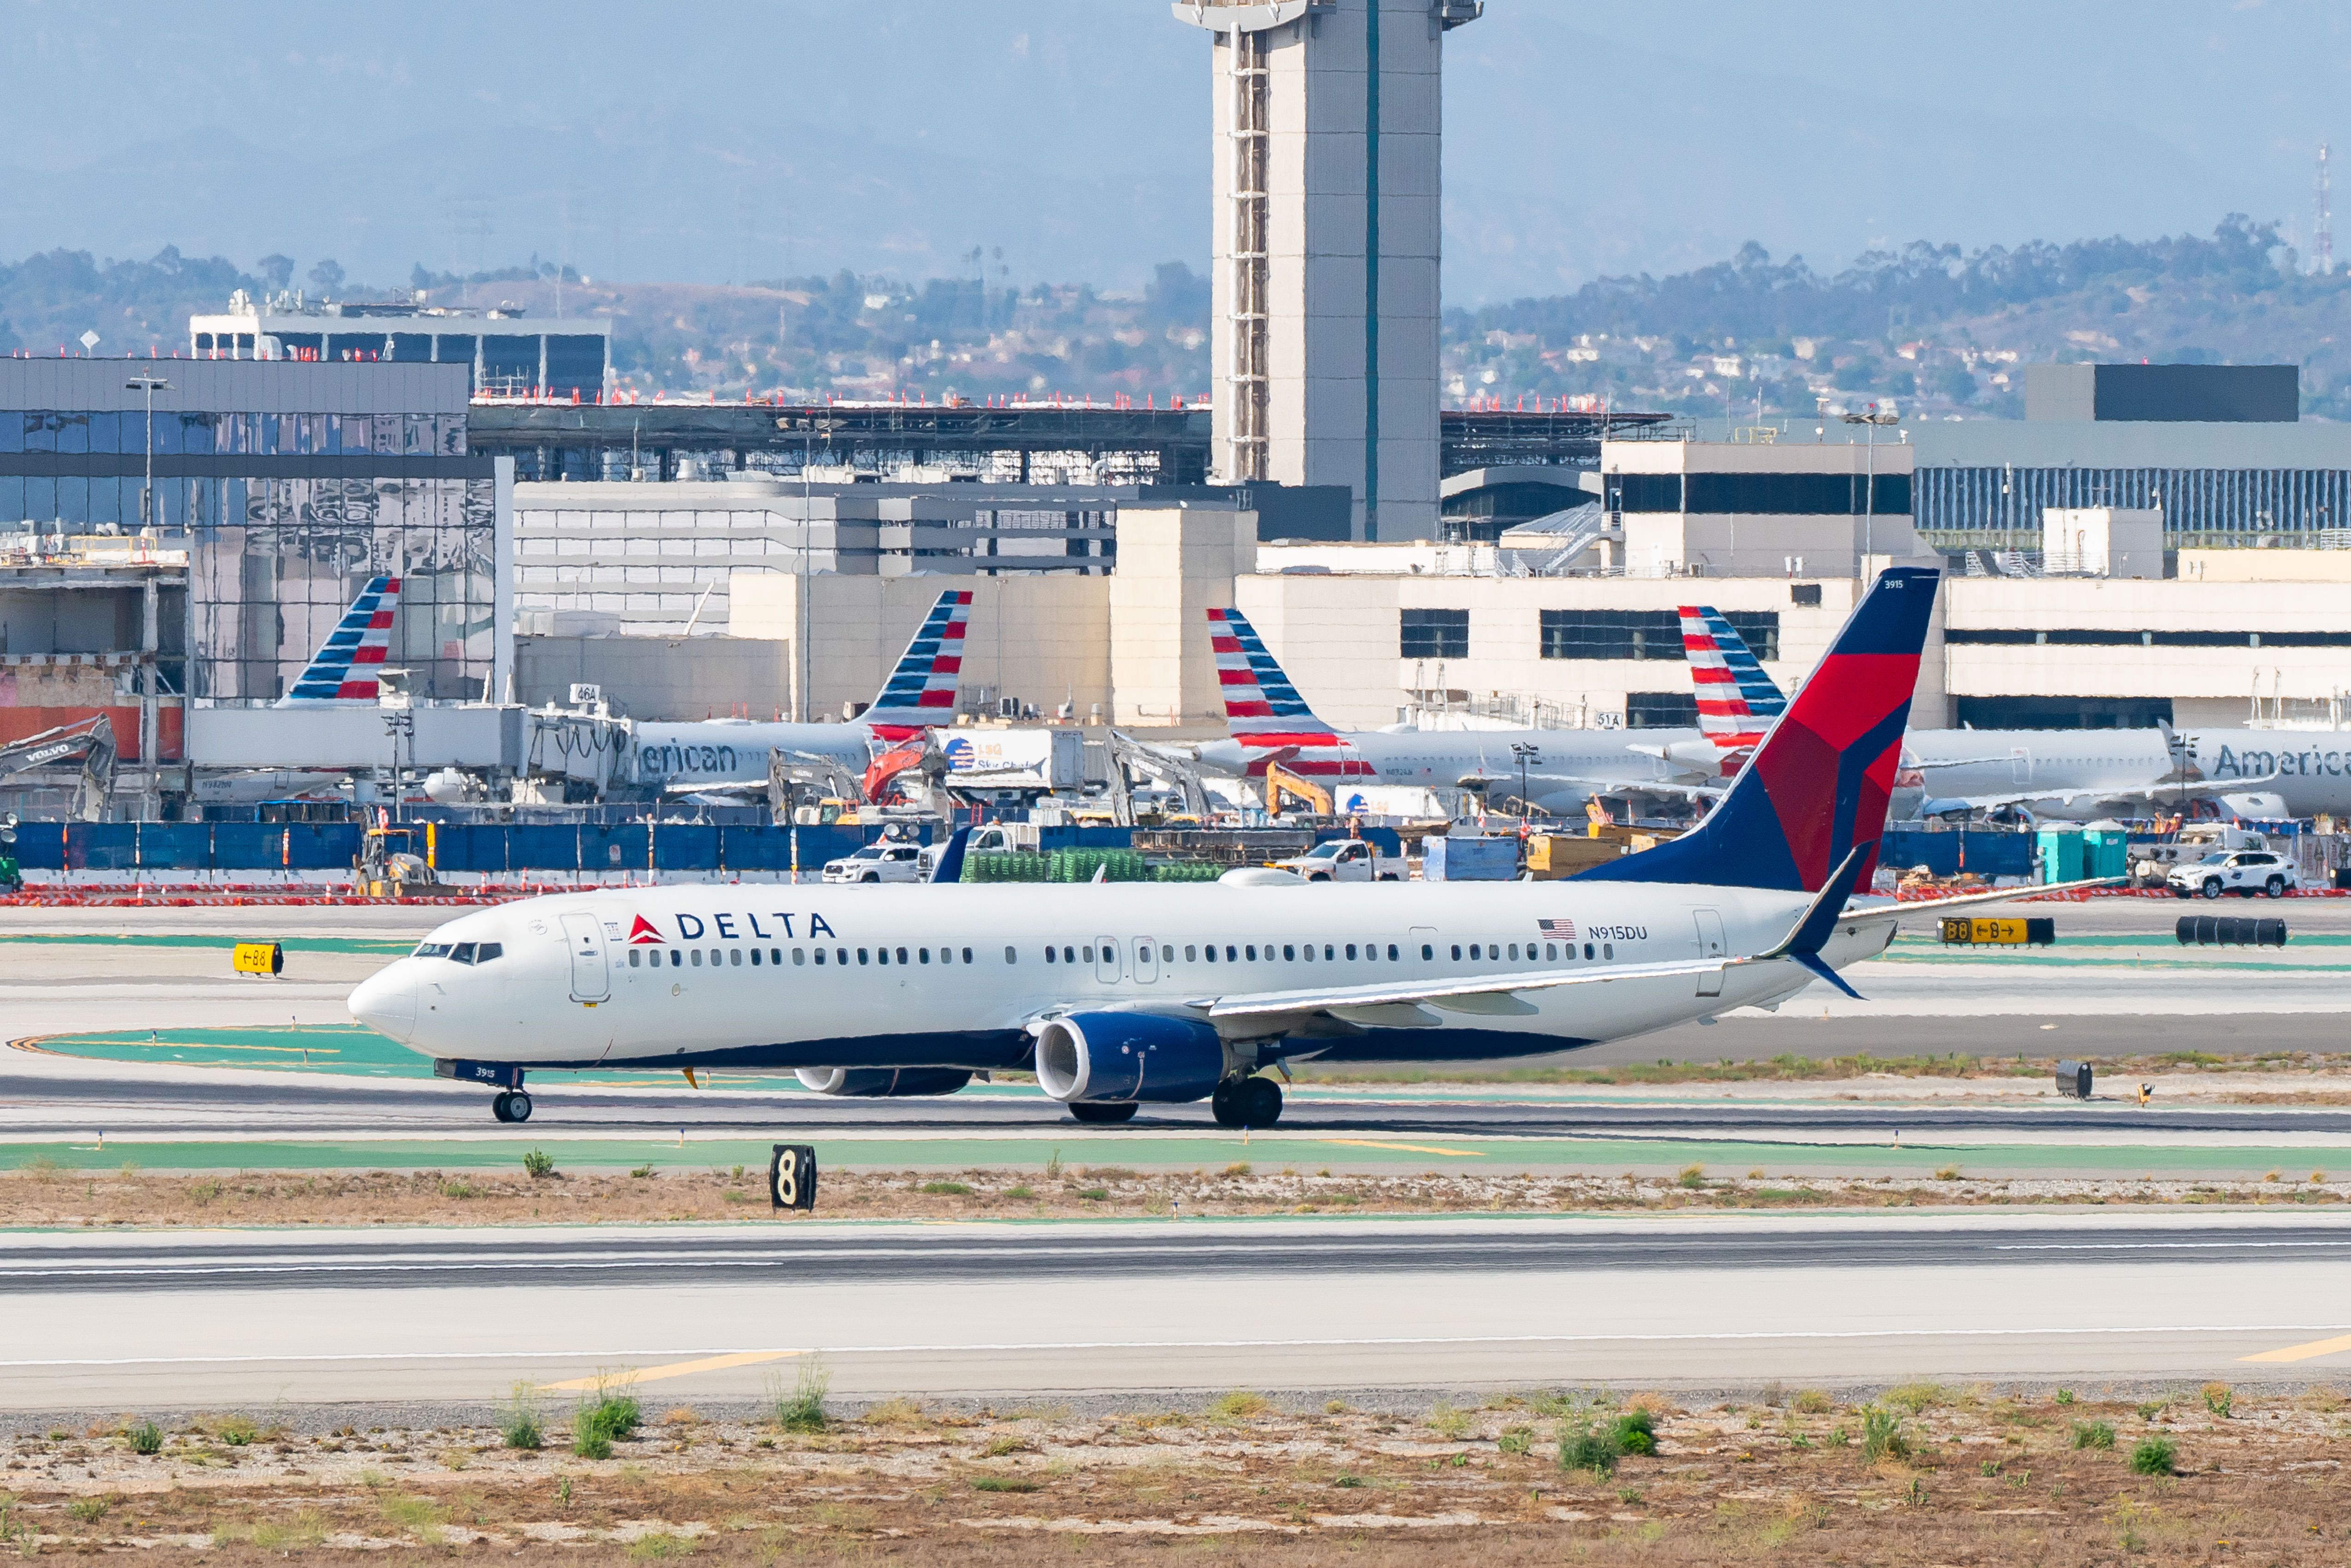 American Airlines and Delta Air Lines at Los Angeles International Airport